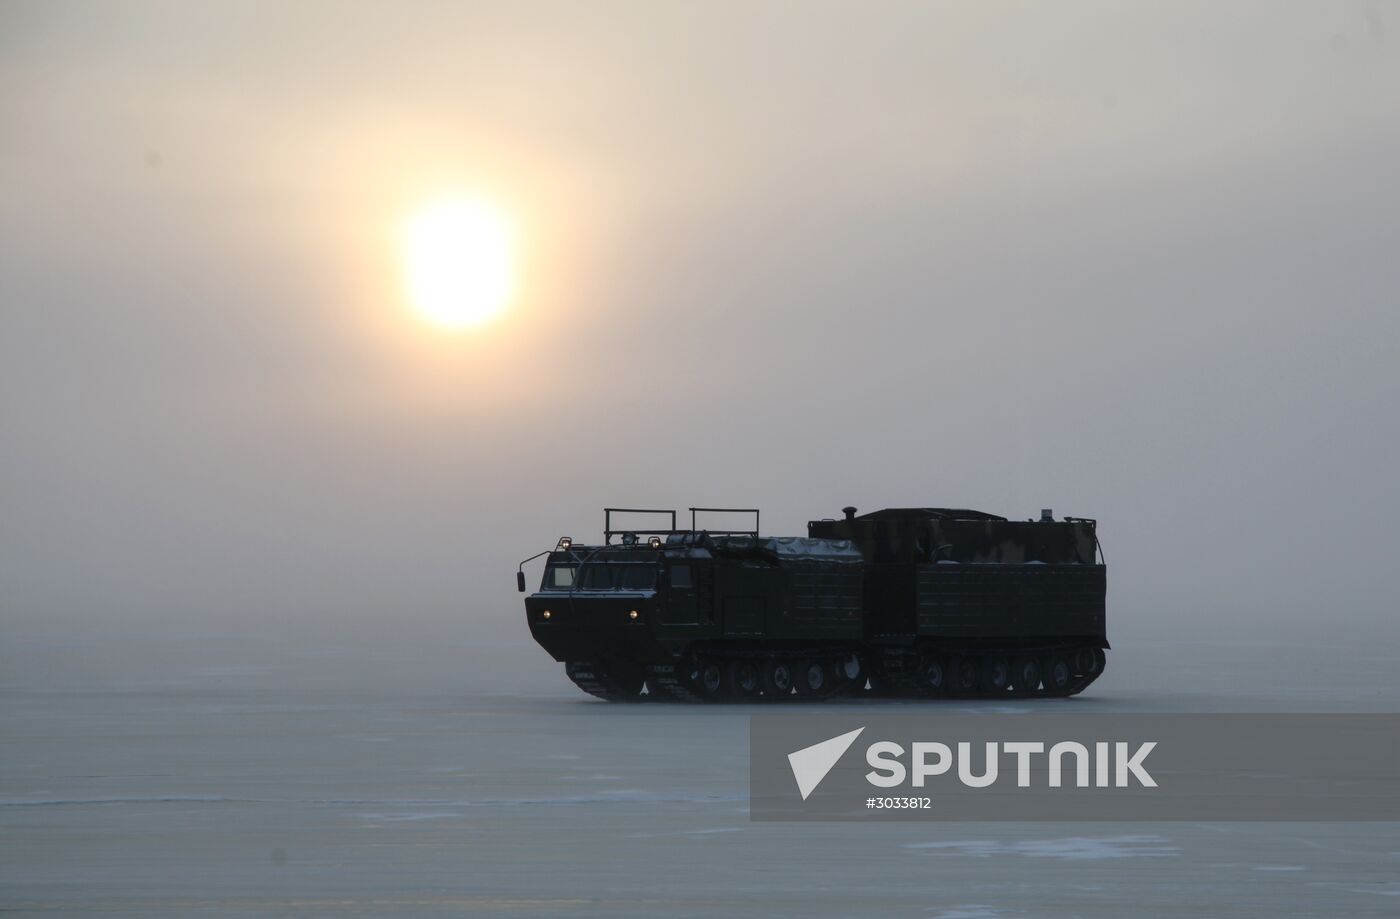 Testing new models of armaments, military and special equipment in the Arctic